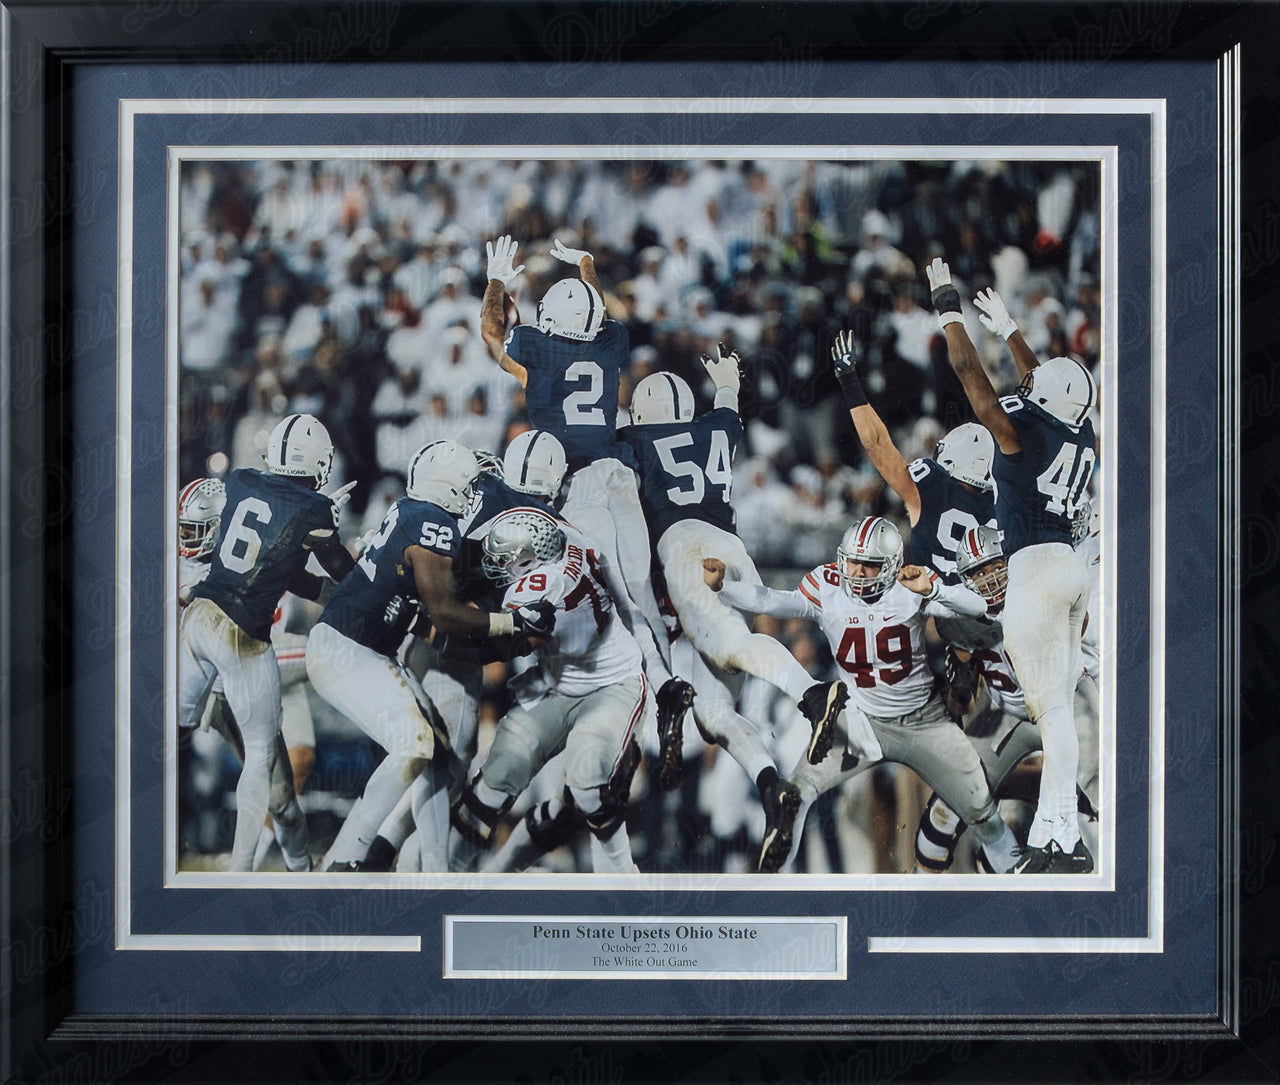 Penn State Nittany Lions Blocked Field Goal v. Ohio State College Football Framed and Matted Photo - Dynasty Sports & Framing 